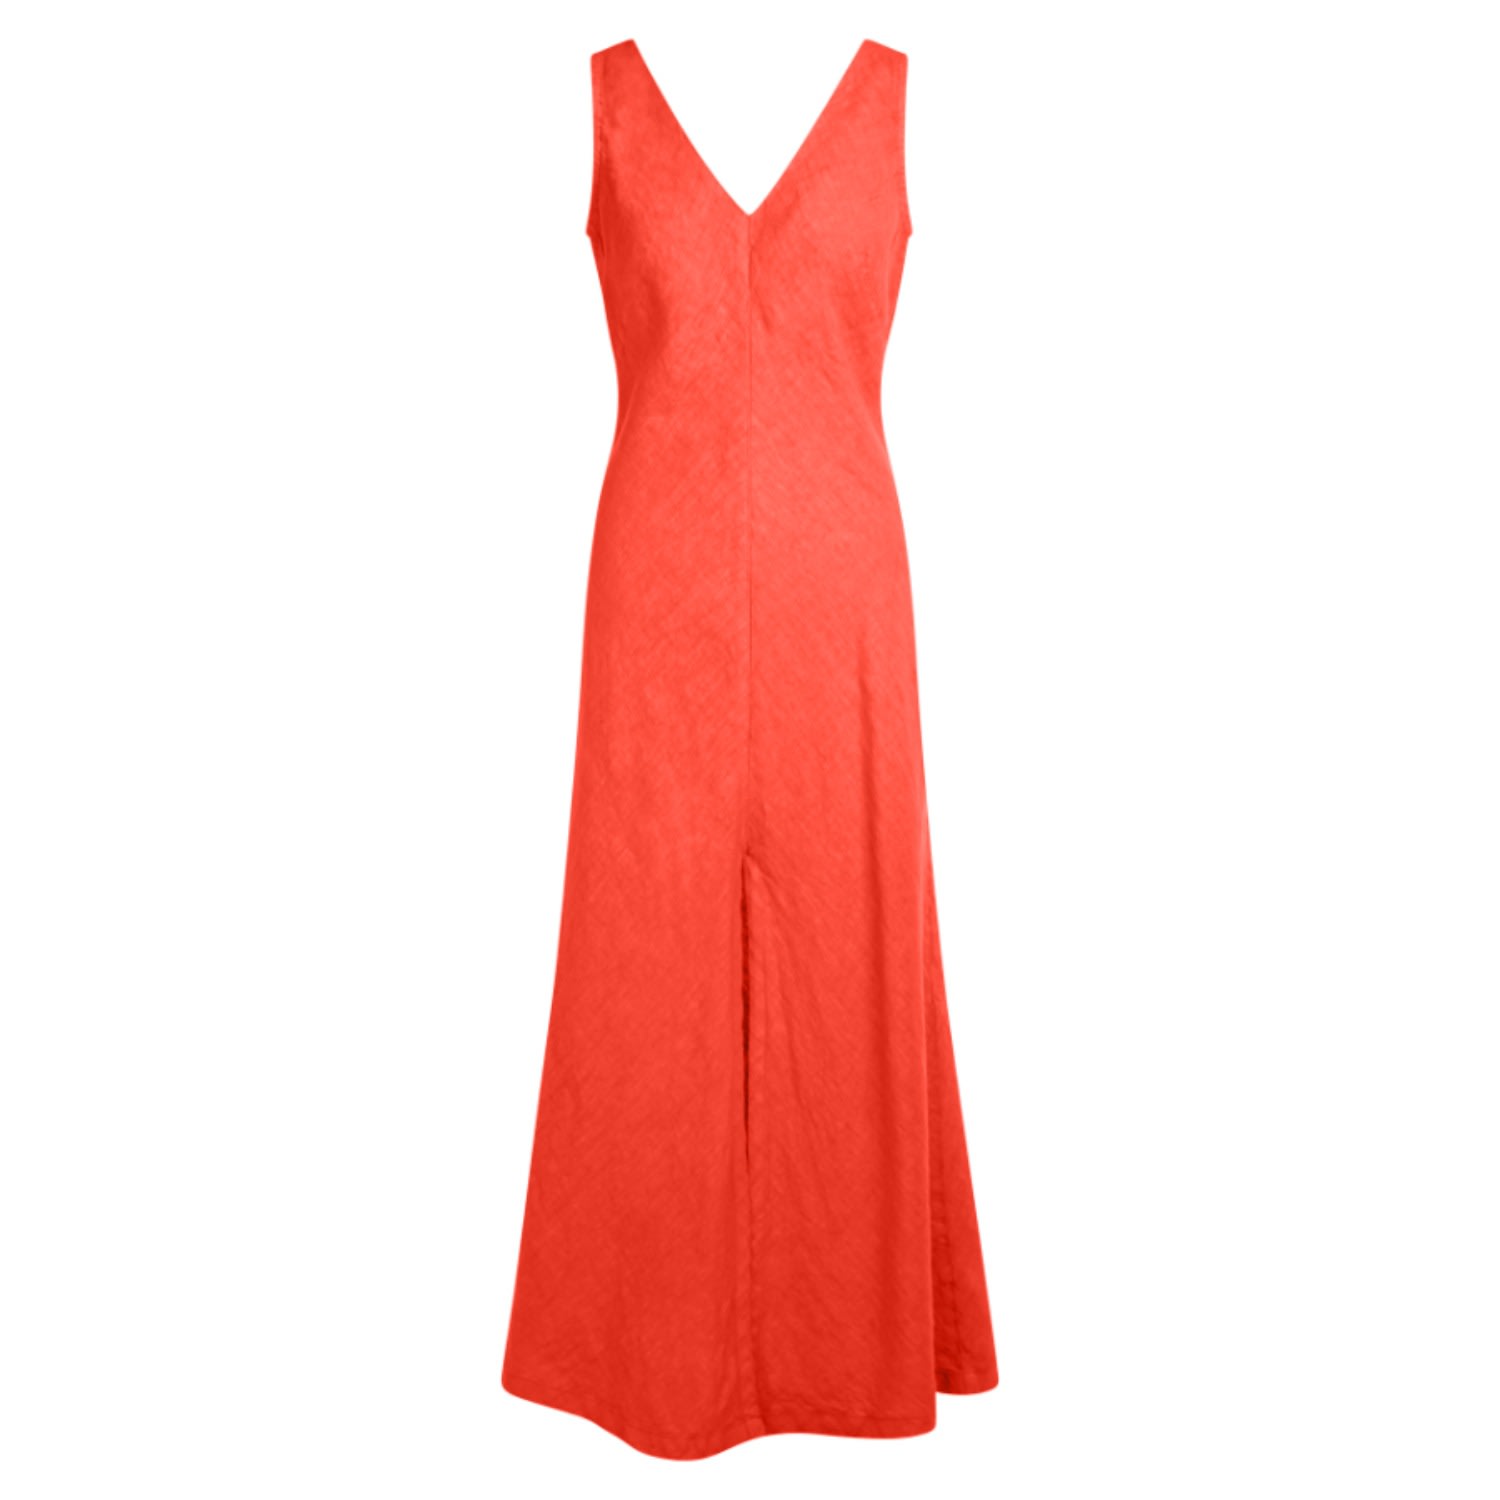 Women’s Red "V" Neck Maxi Linen Dress - Coral Reef Large Haris Cotton